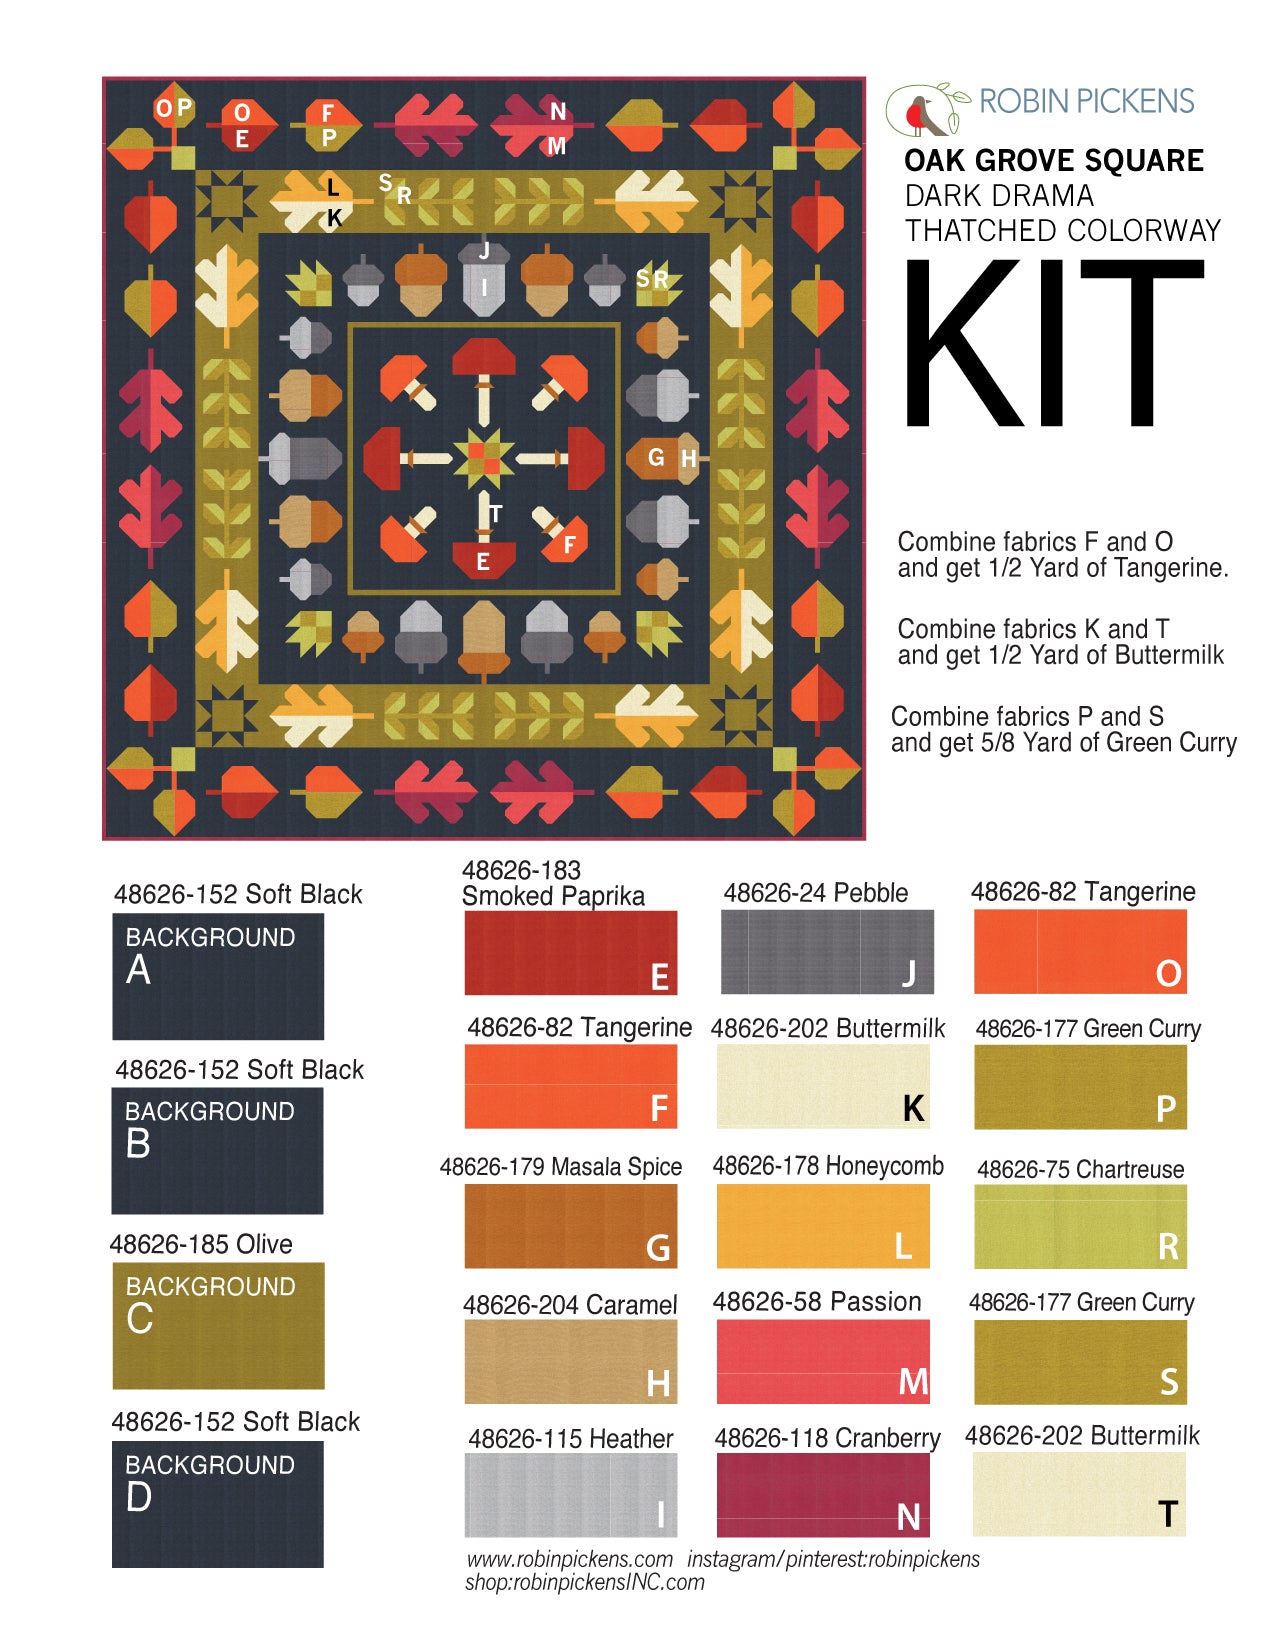 A Quilt KIT of Oak Grove Square in Thatched- DARK DRAMA colorway